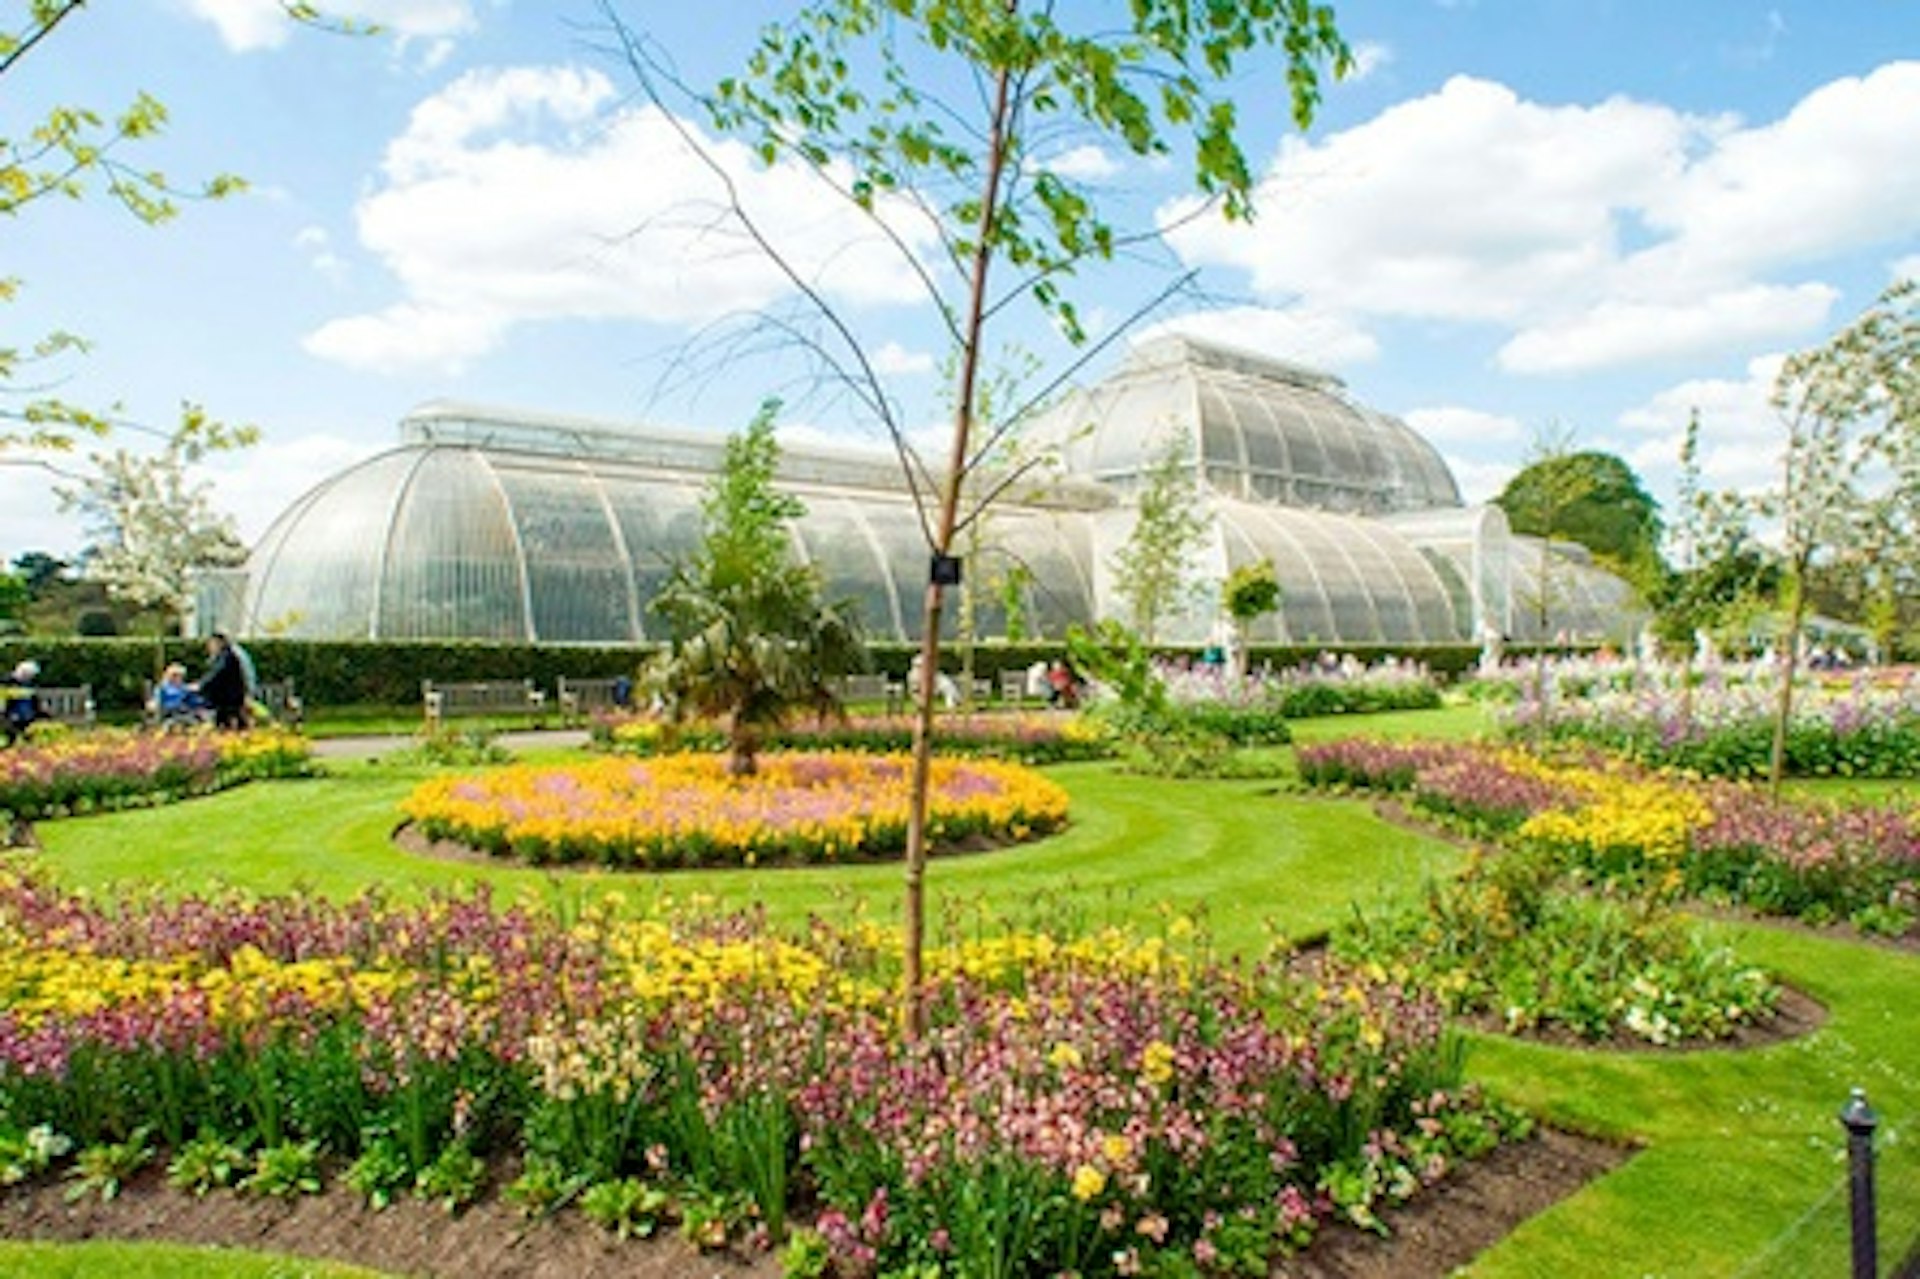 Family Visit to Kew Gardens for Two Adults and Two Children 1